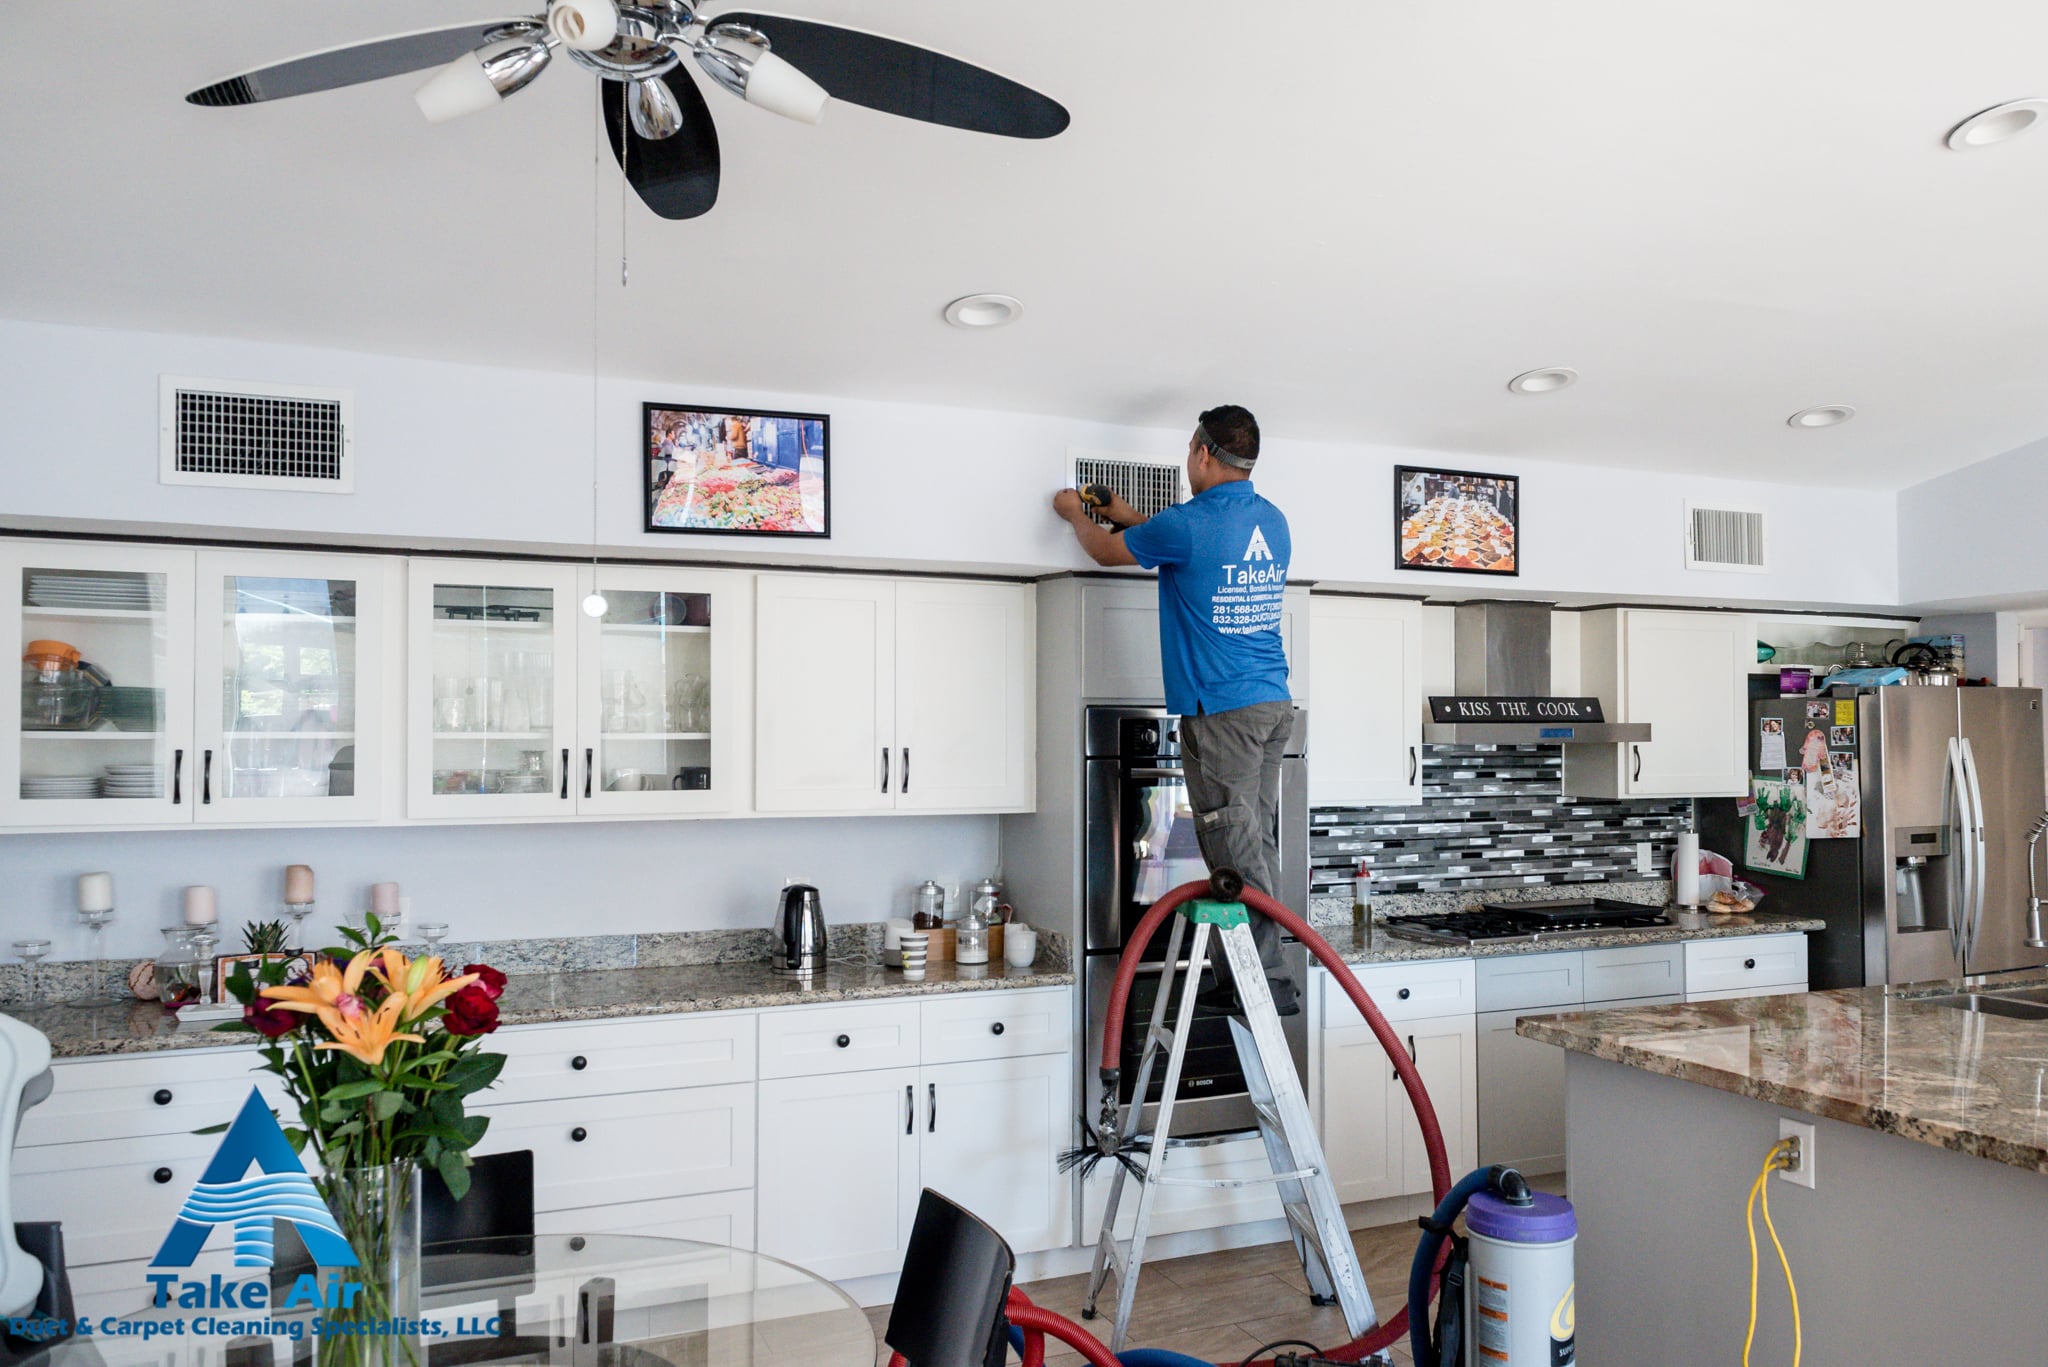 Air Duct Cleaning Houston Texas